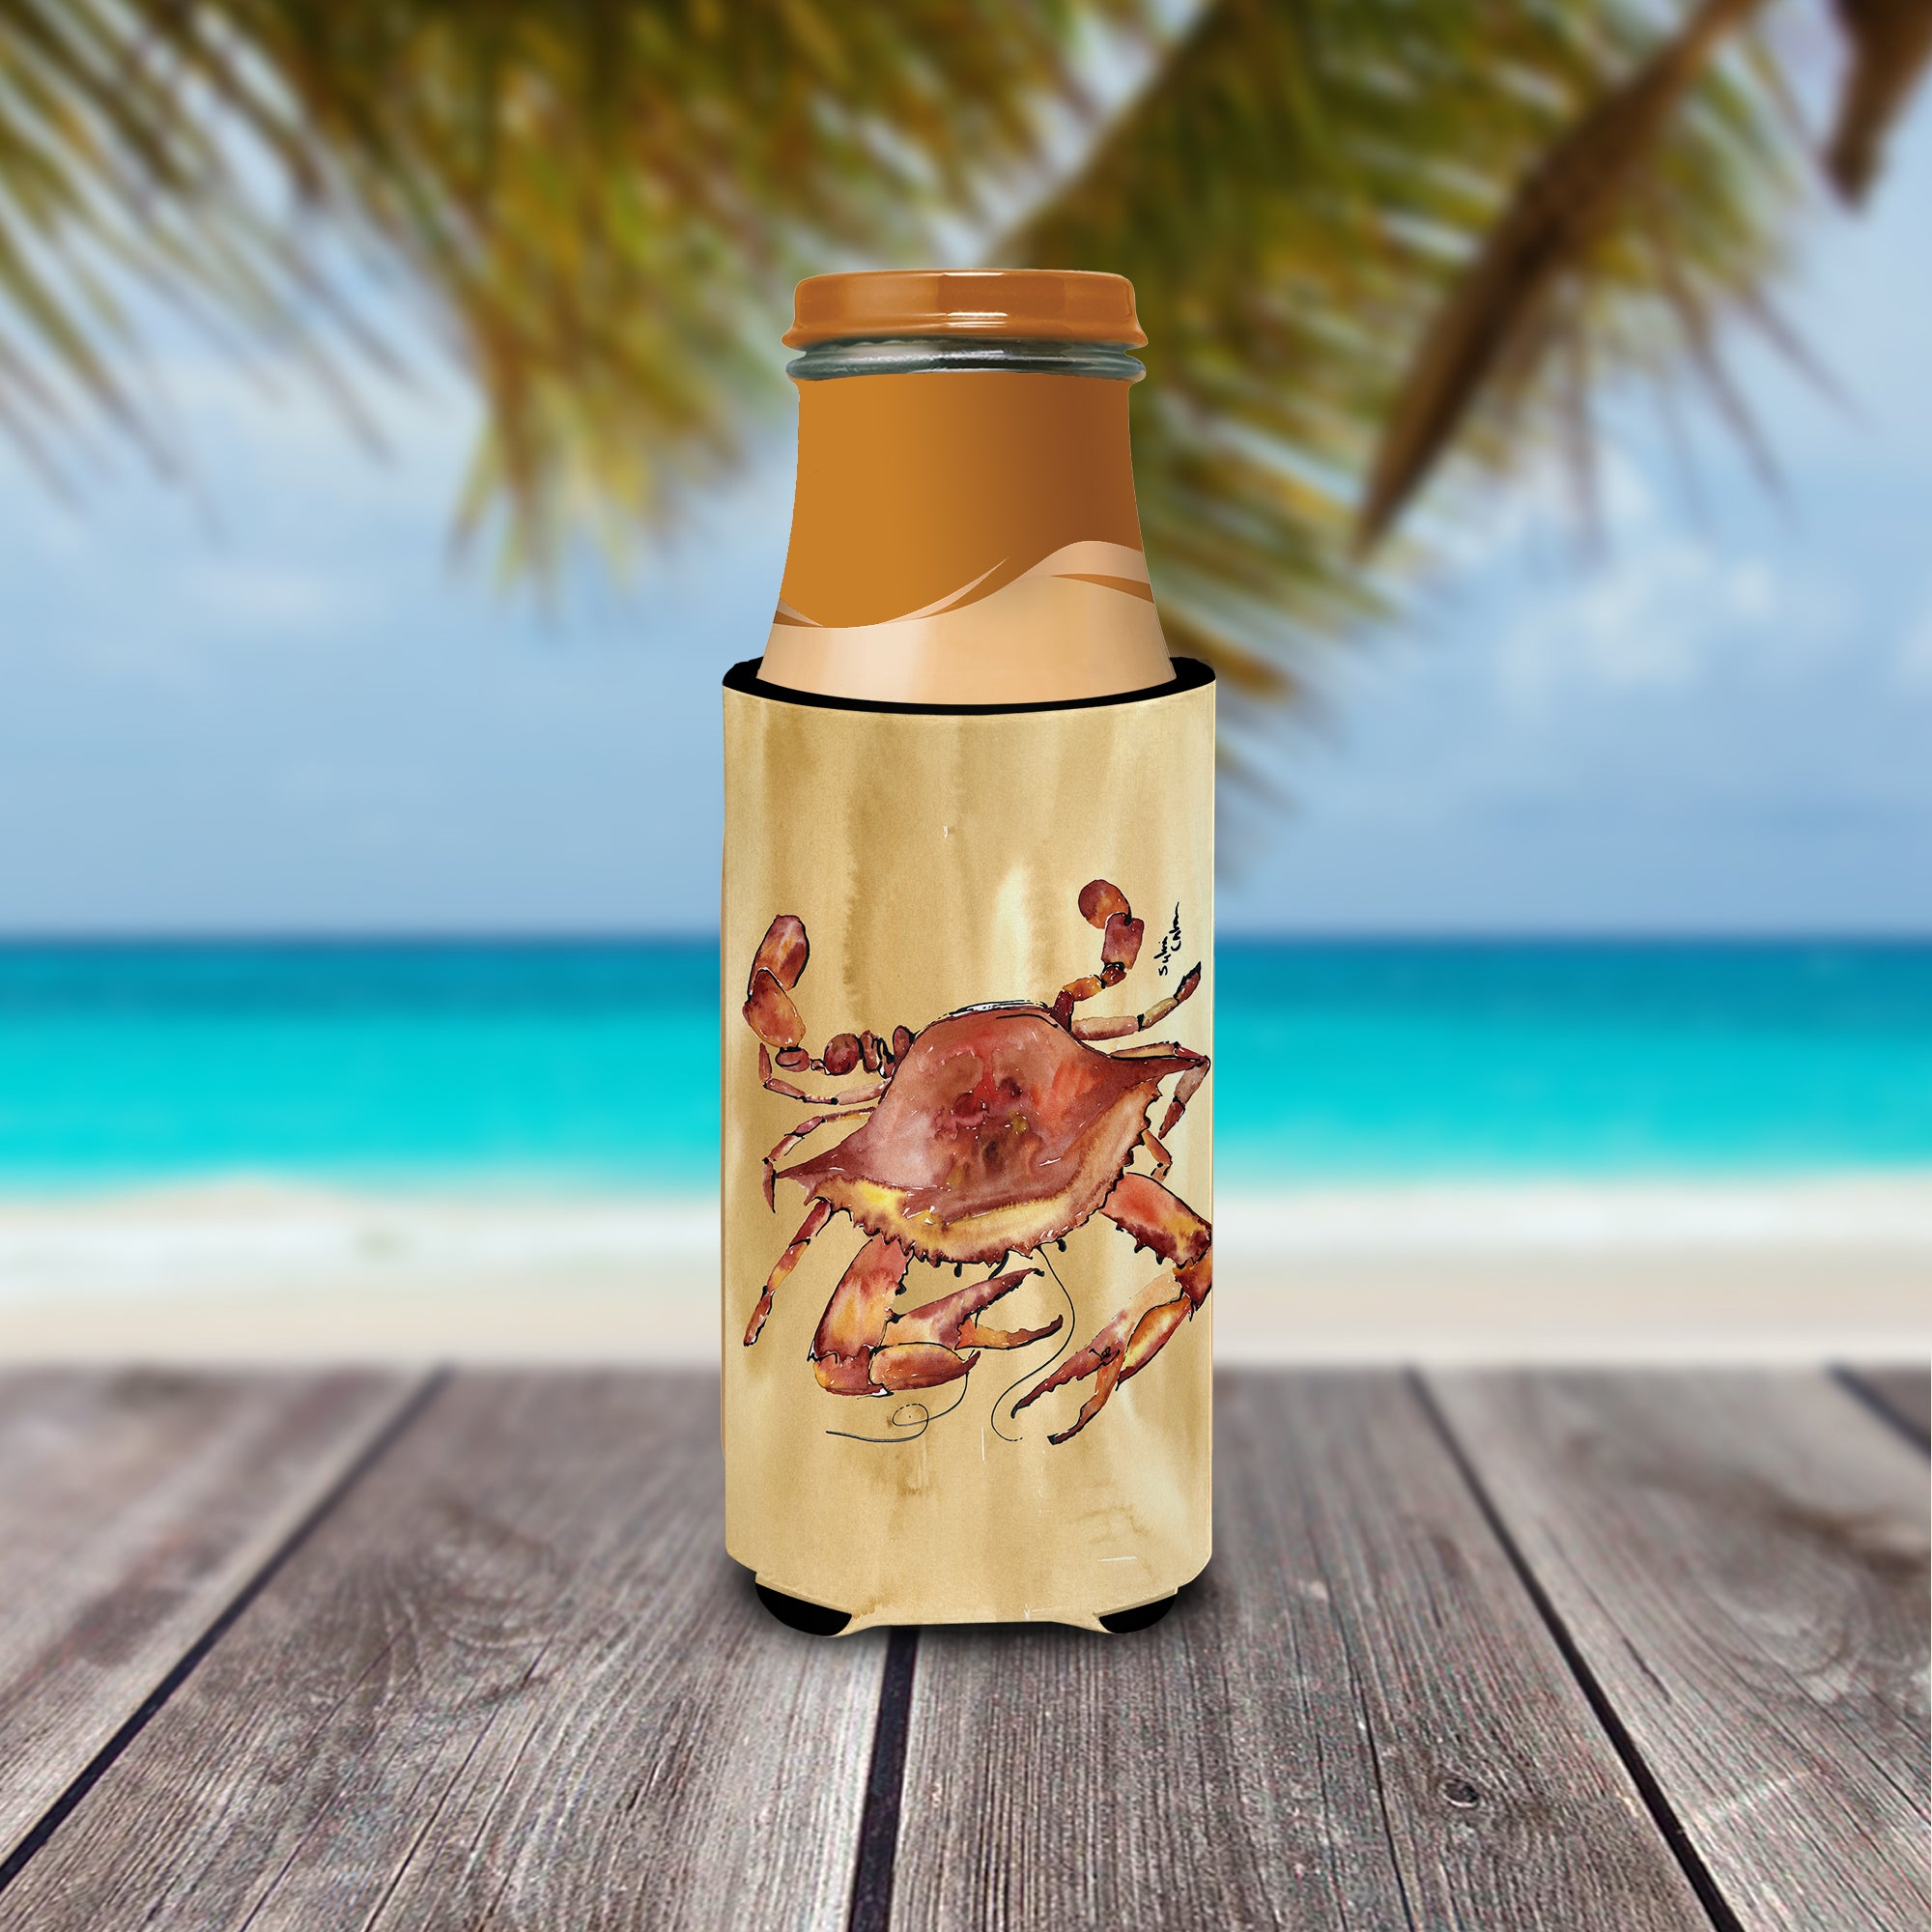 Cooked Crab Sandy Beach Ultra Beverage Insulators for slim cans 8154MUK